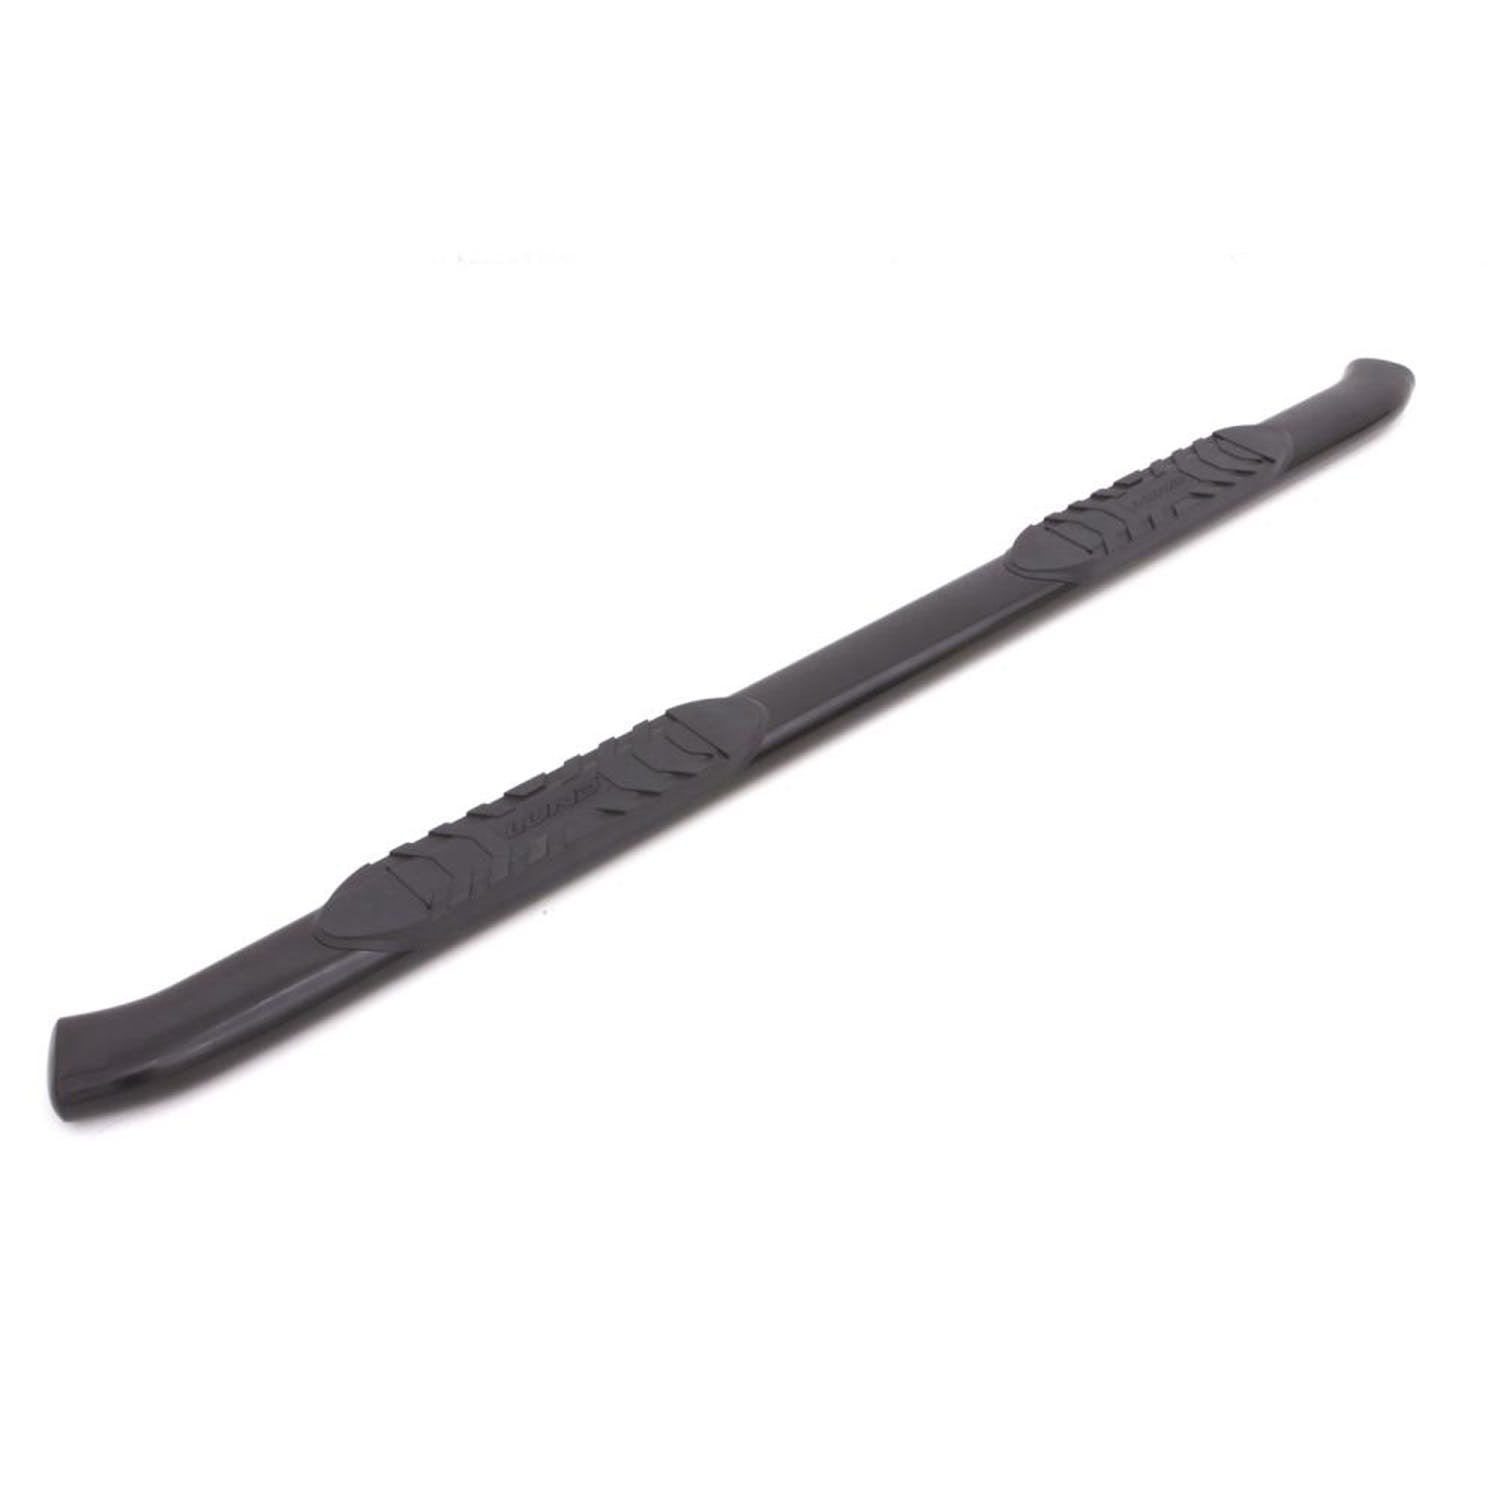 LUND 24273077 5 Inch Oval Curved Nerf Bar - Black LUND -5 inch CURVED OVAL BLACK SS